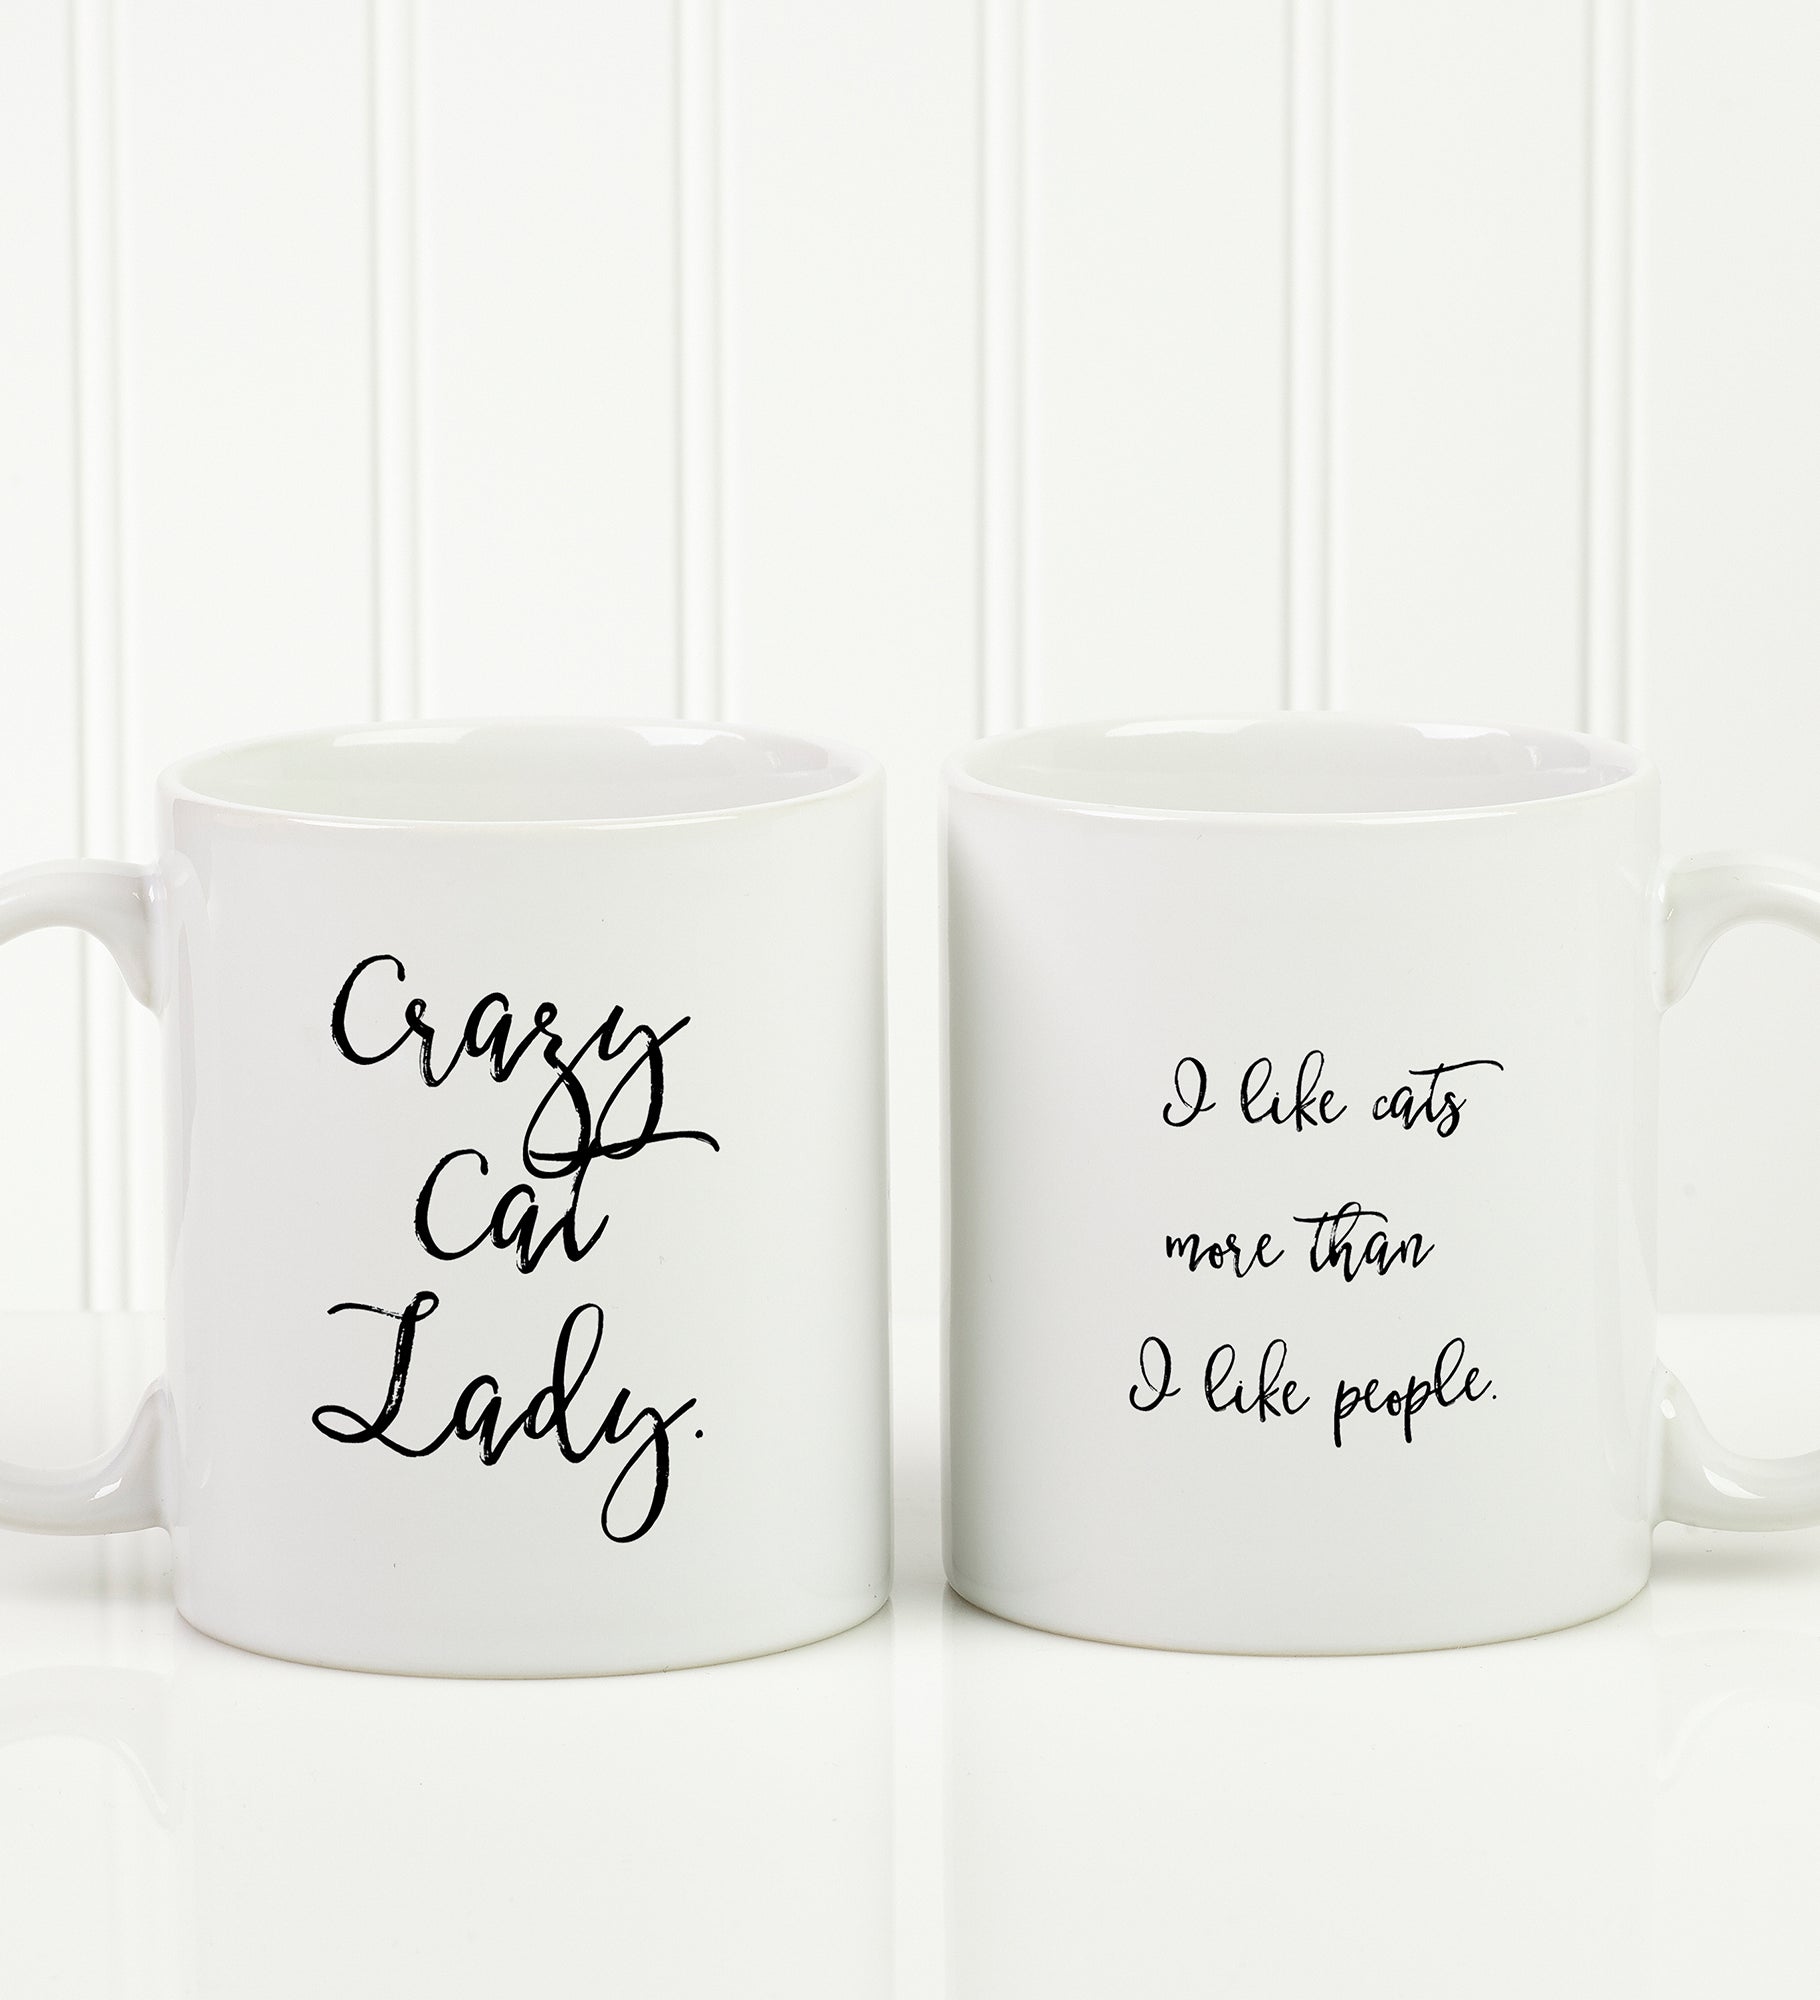 Pet Expressions Personalized Coffee Mug